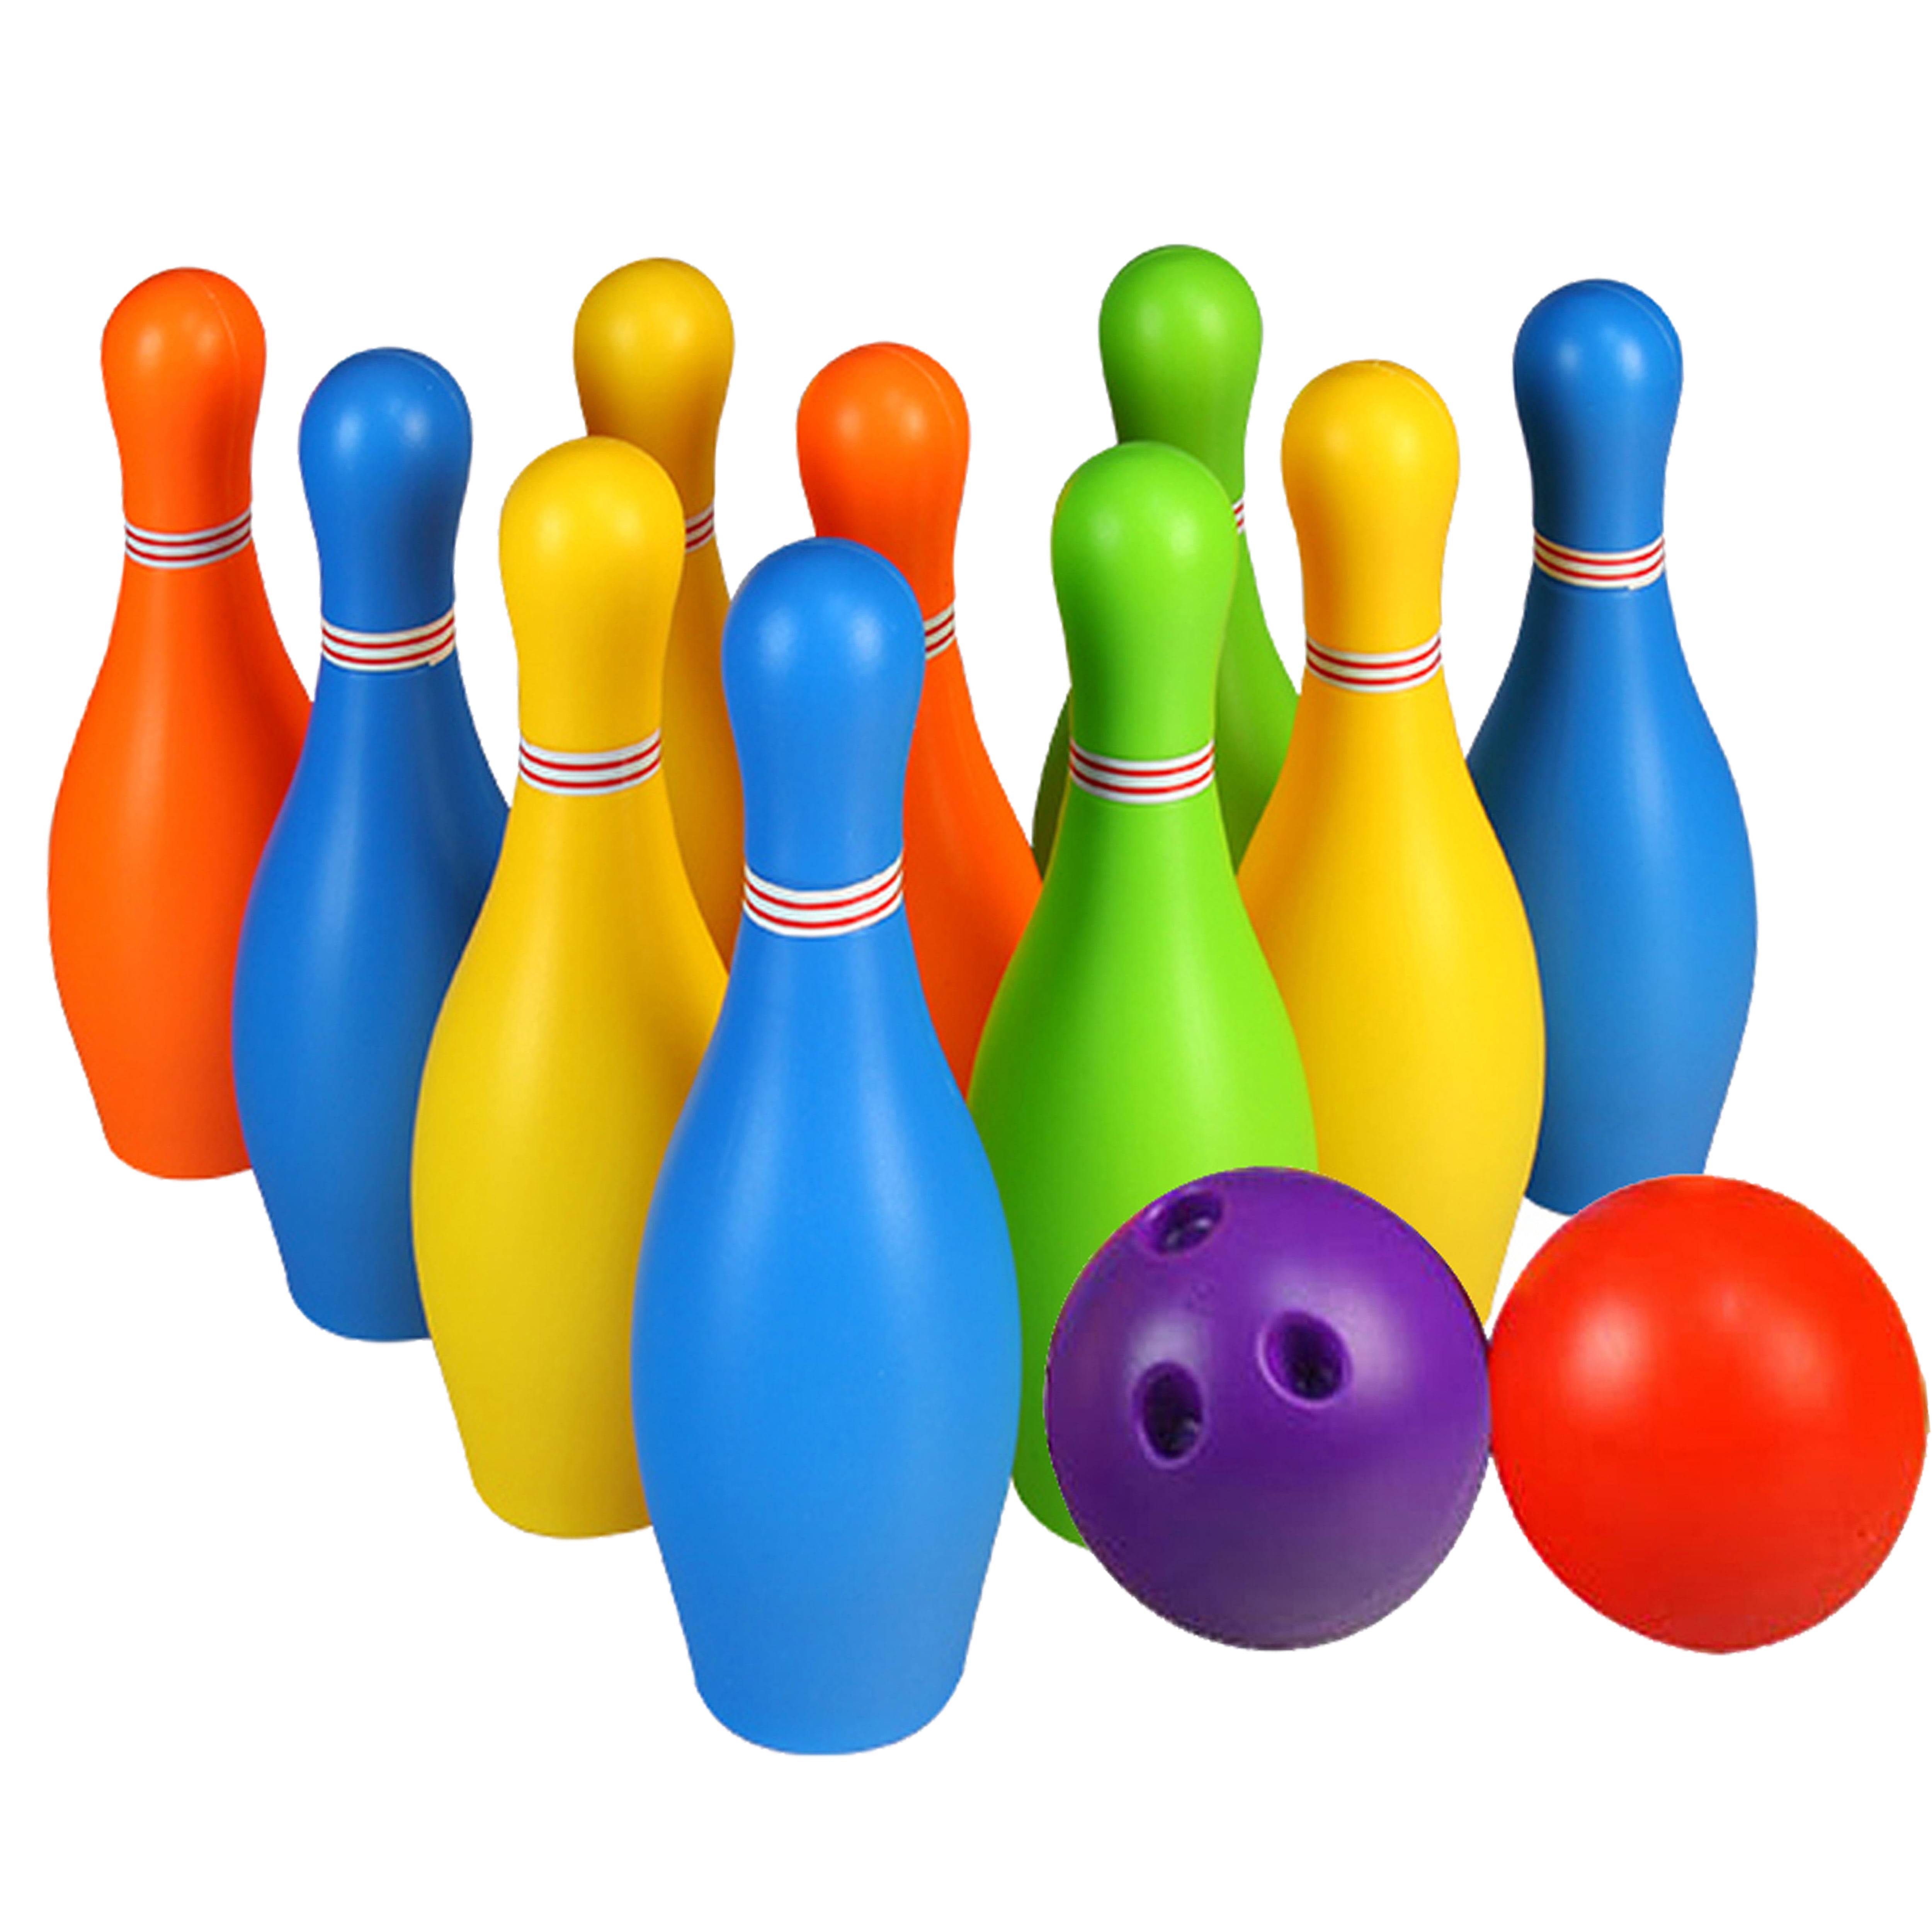 Kids Wooden Bowling Ball Toys Bowling Set for Kids with 6 Animal Head Bowling Pins &2 Bowling Balls Indoor and Outdoor Fun for Toddlers